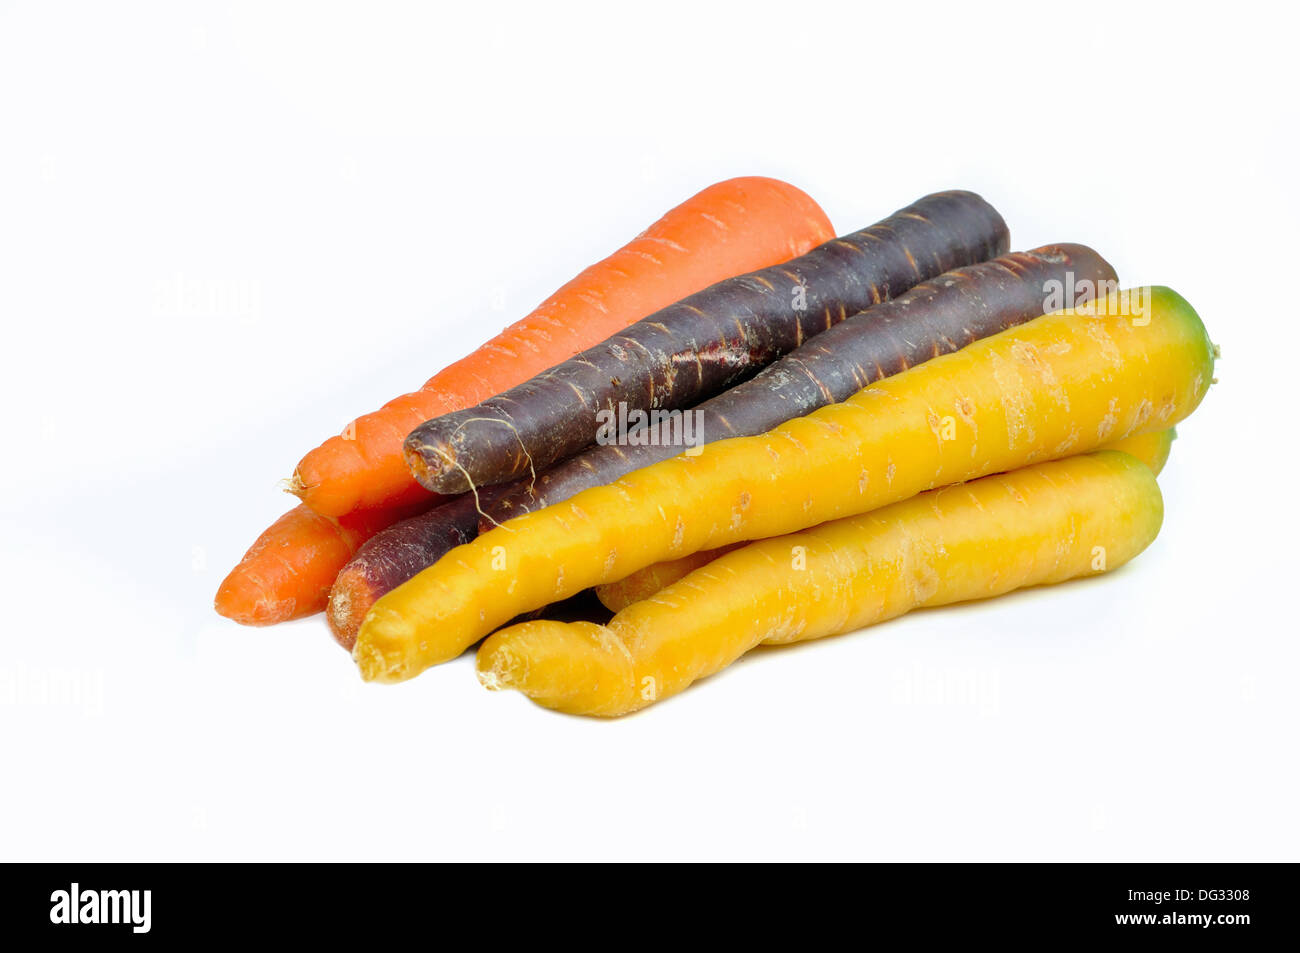 carrots of different colors on white background Stock Photo